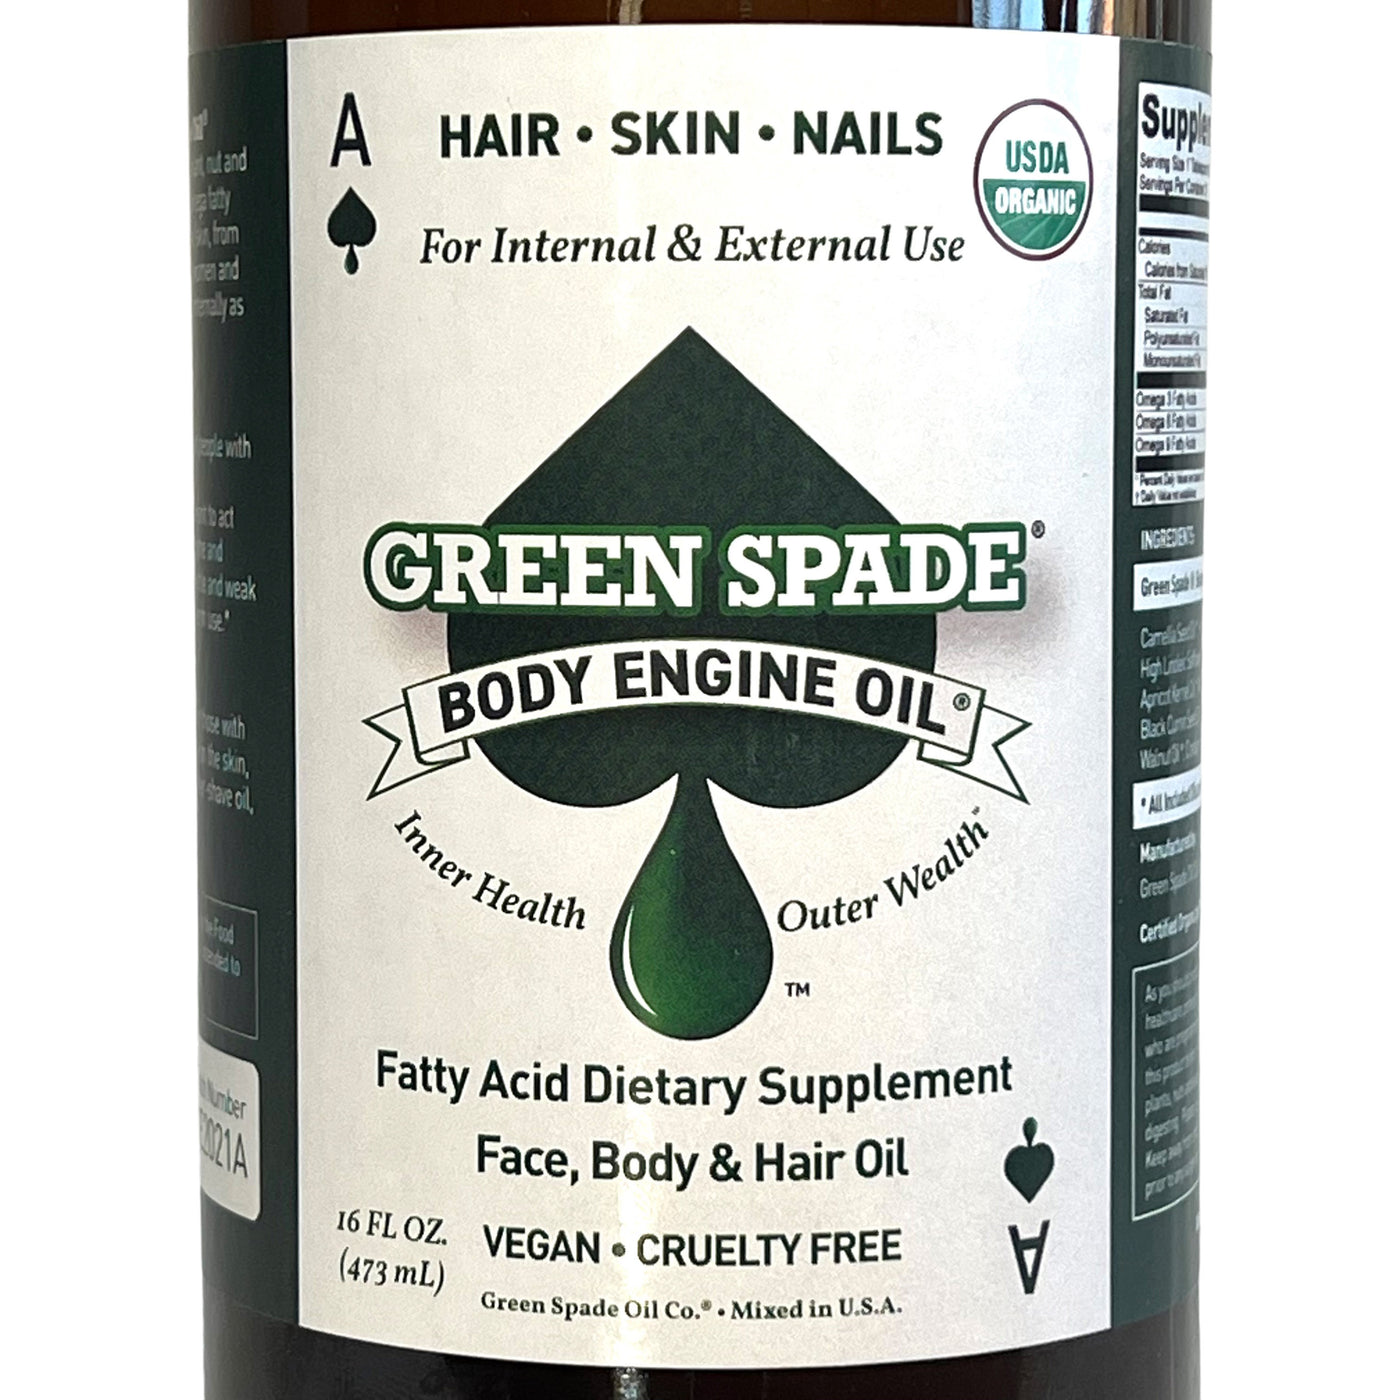 Body Engine Oil by Green Spade, Certified Organic Face, Body and Hair Oil & Fatty Acid Supplement